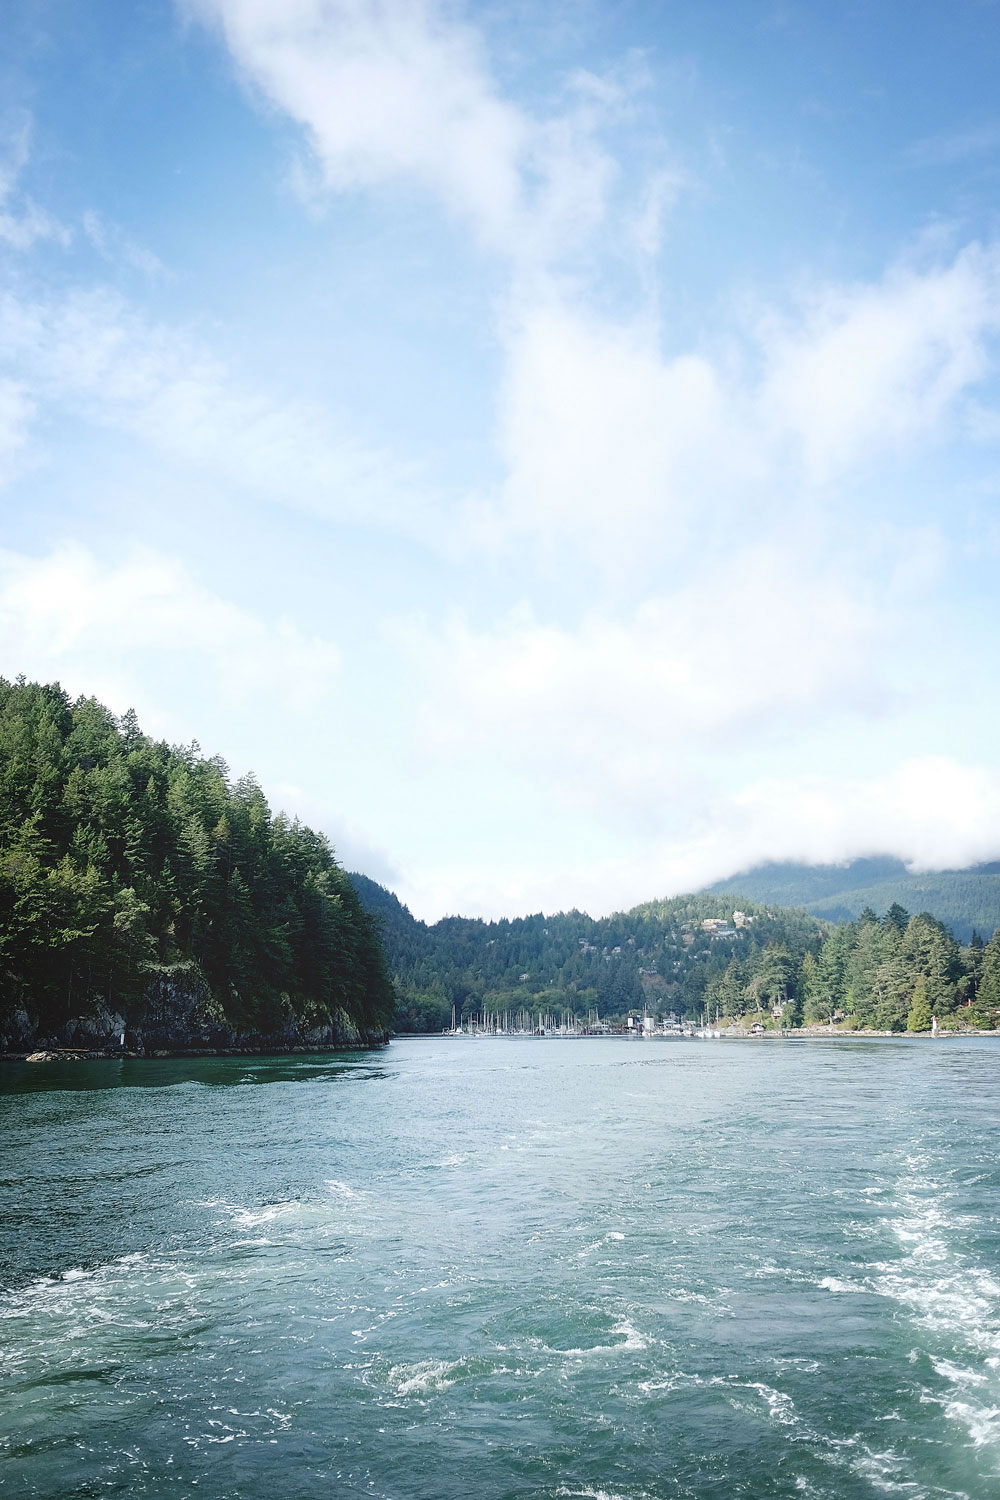 What to do in bowen island for the weekend by To Vogue or Bust